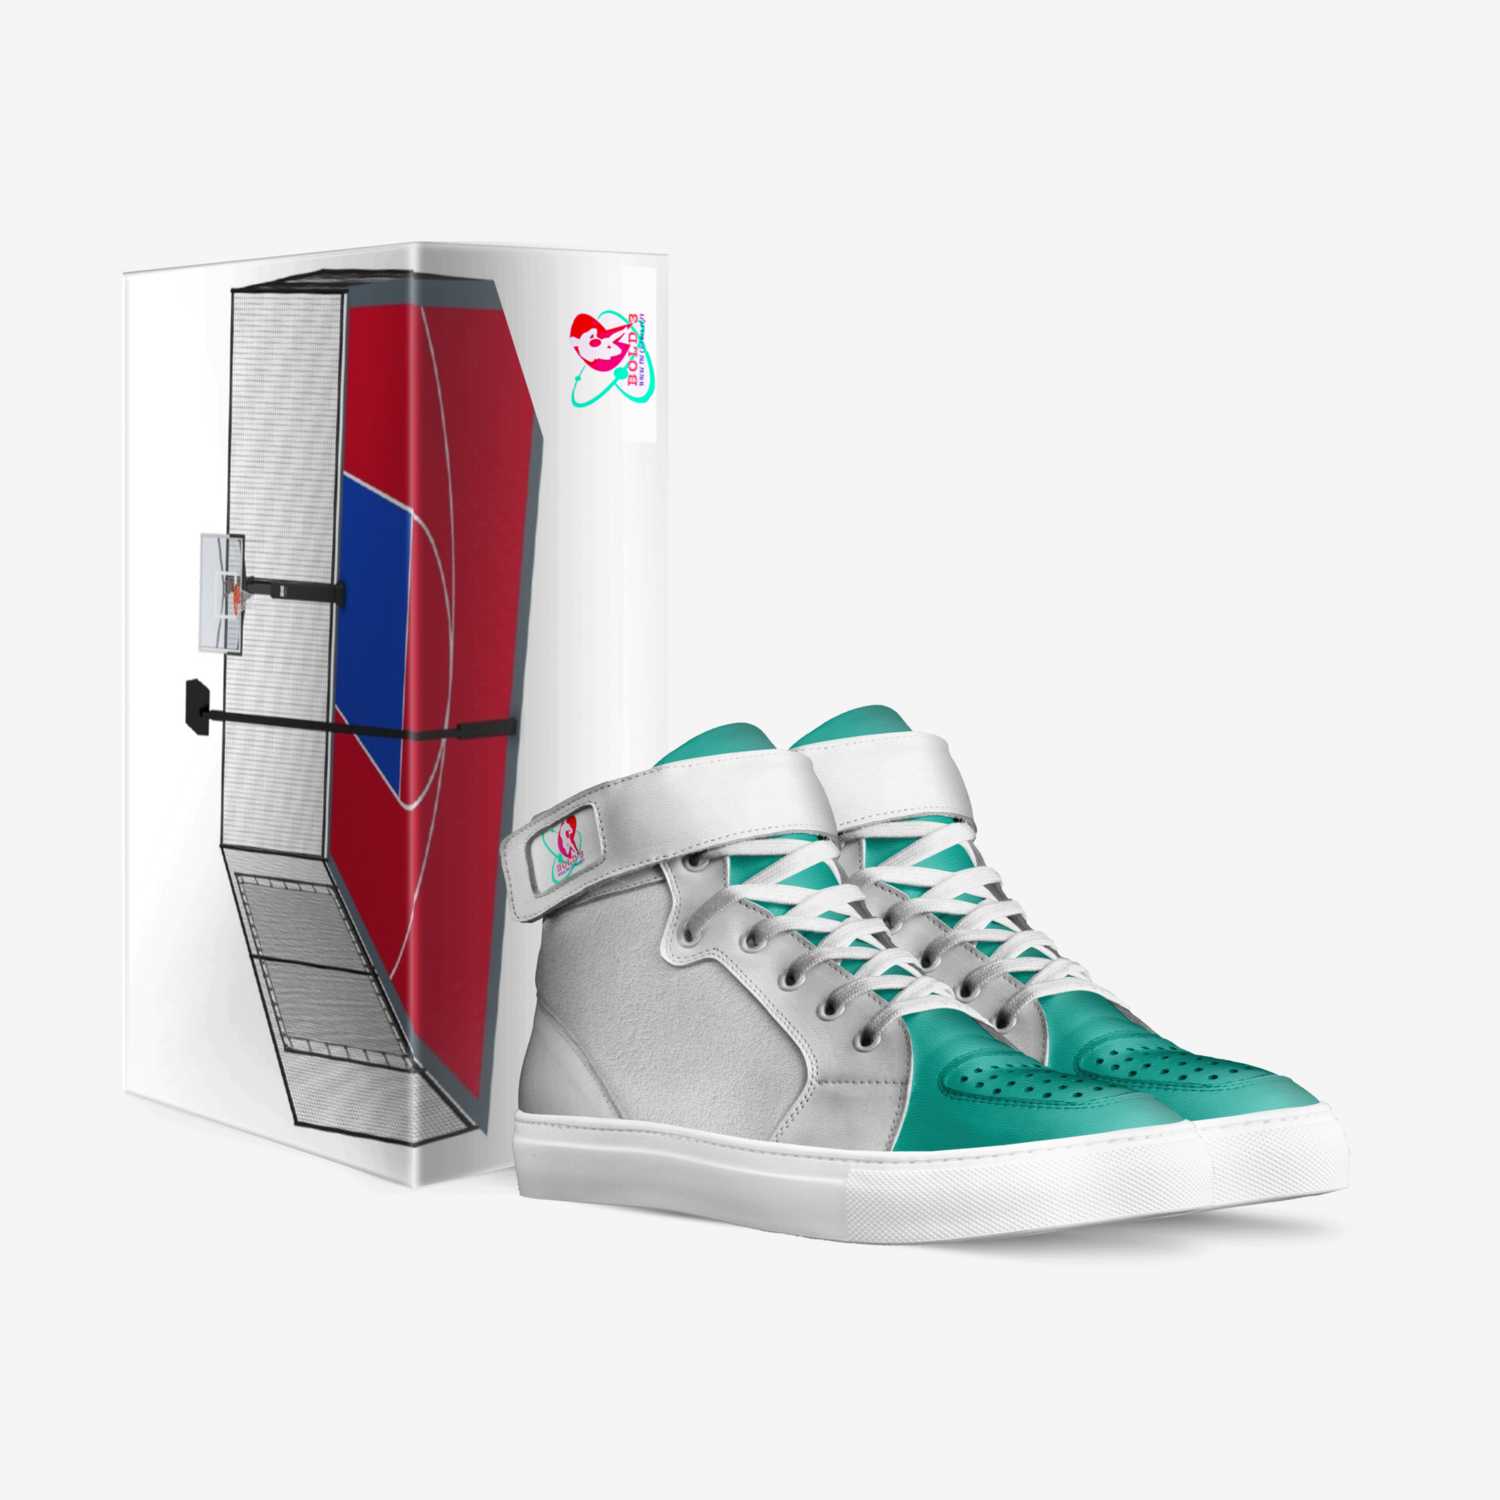 BOLD3 custom made in Italy shoes by Bold3 League | Box view